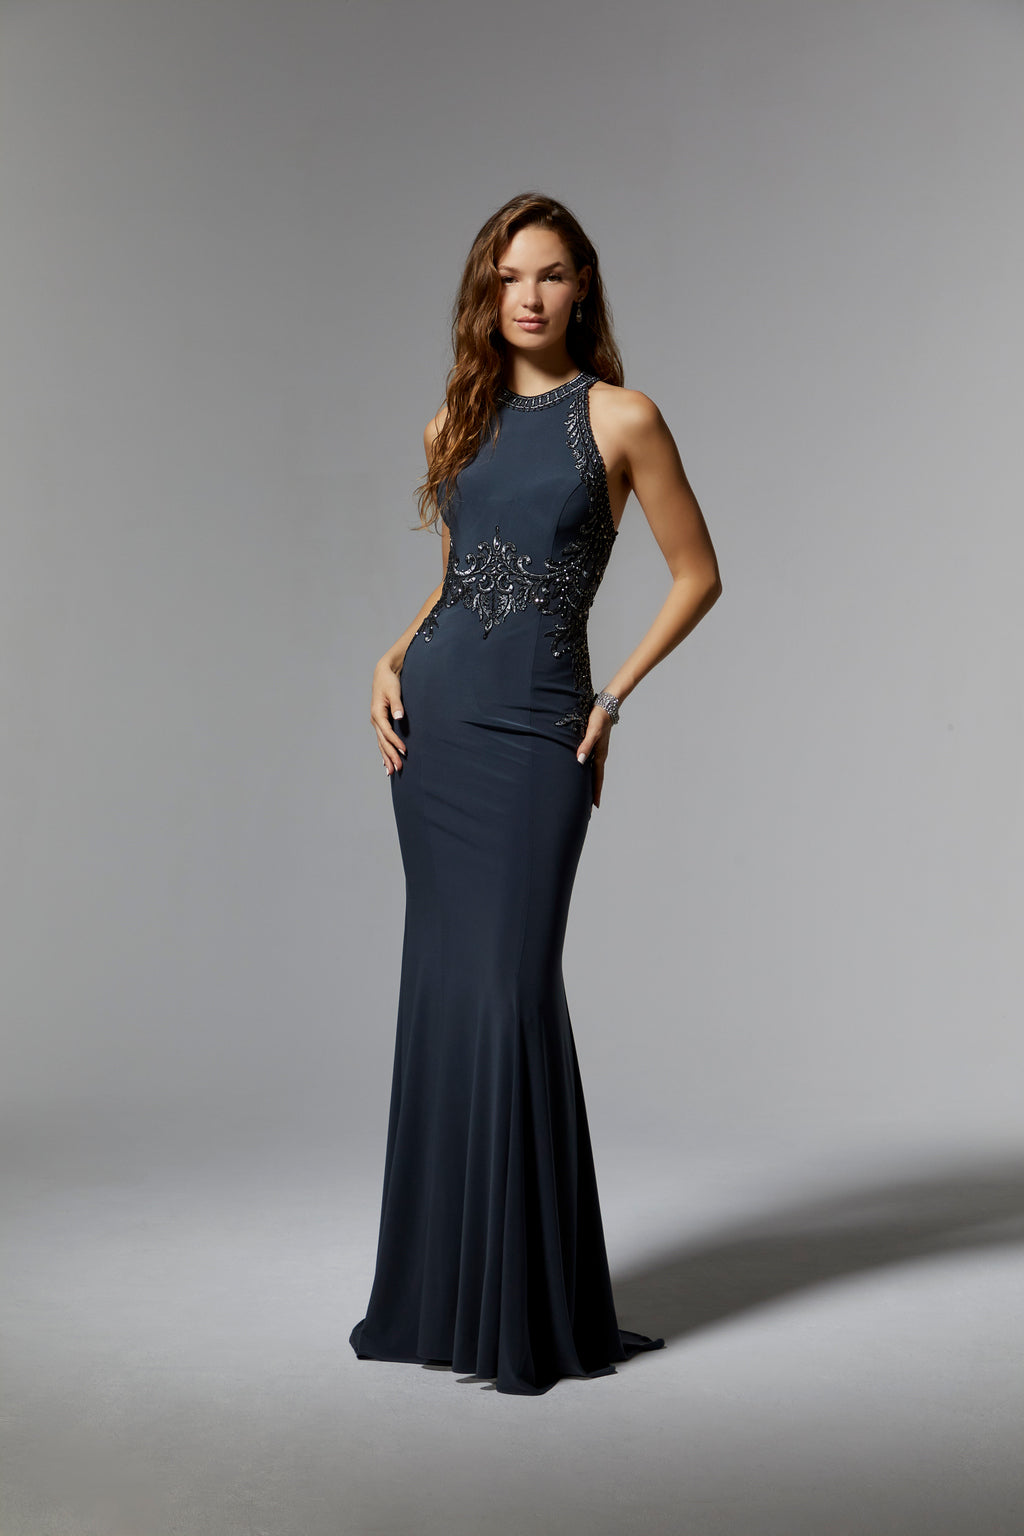 MGNY Madeline Gardner New York 71625 Long Halter Fitted Evening Gown Navy Charcoal